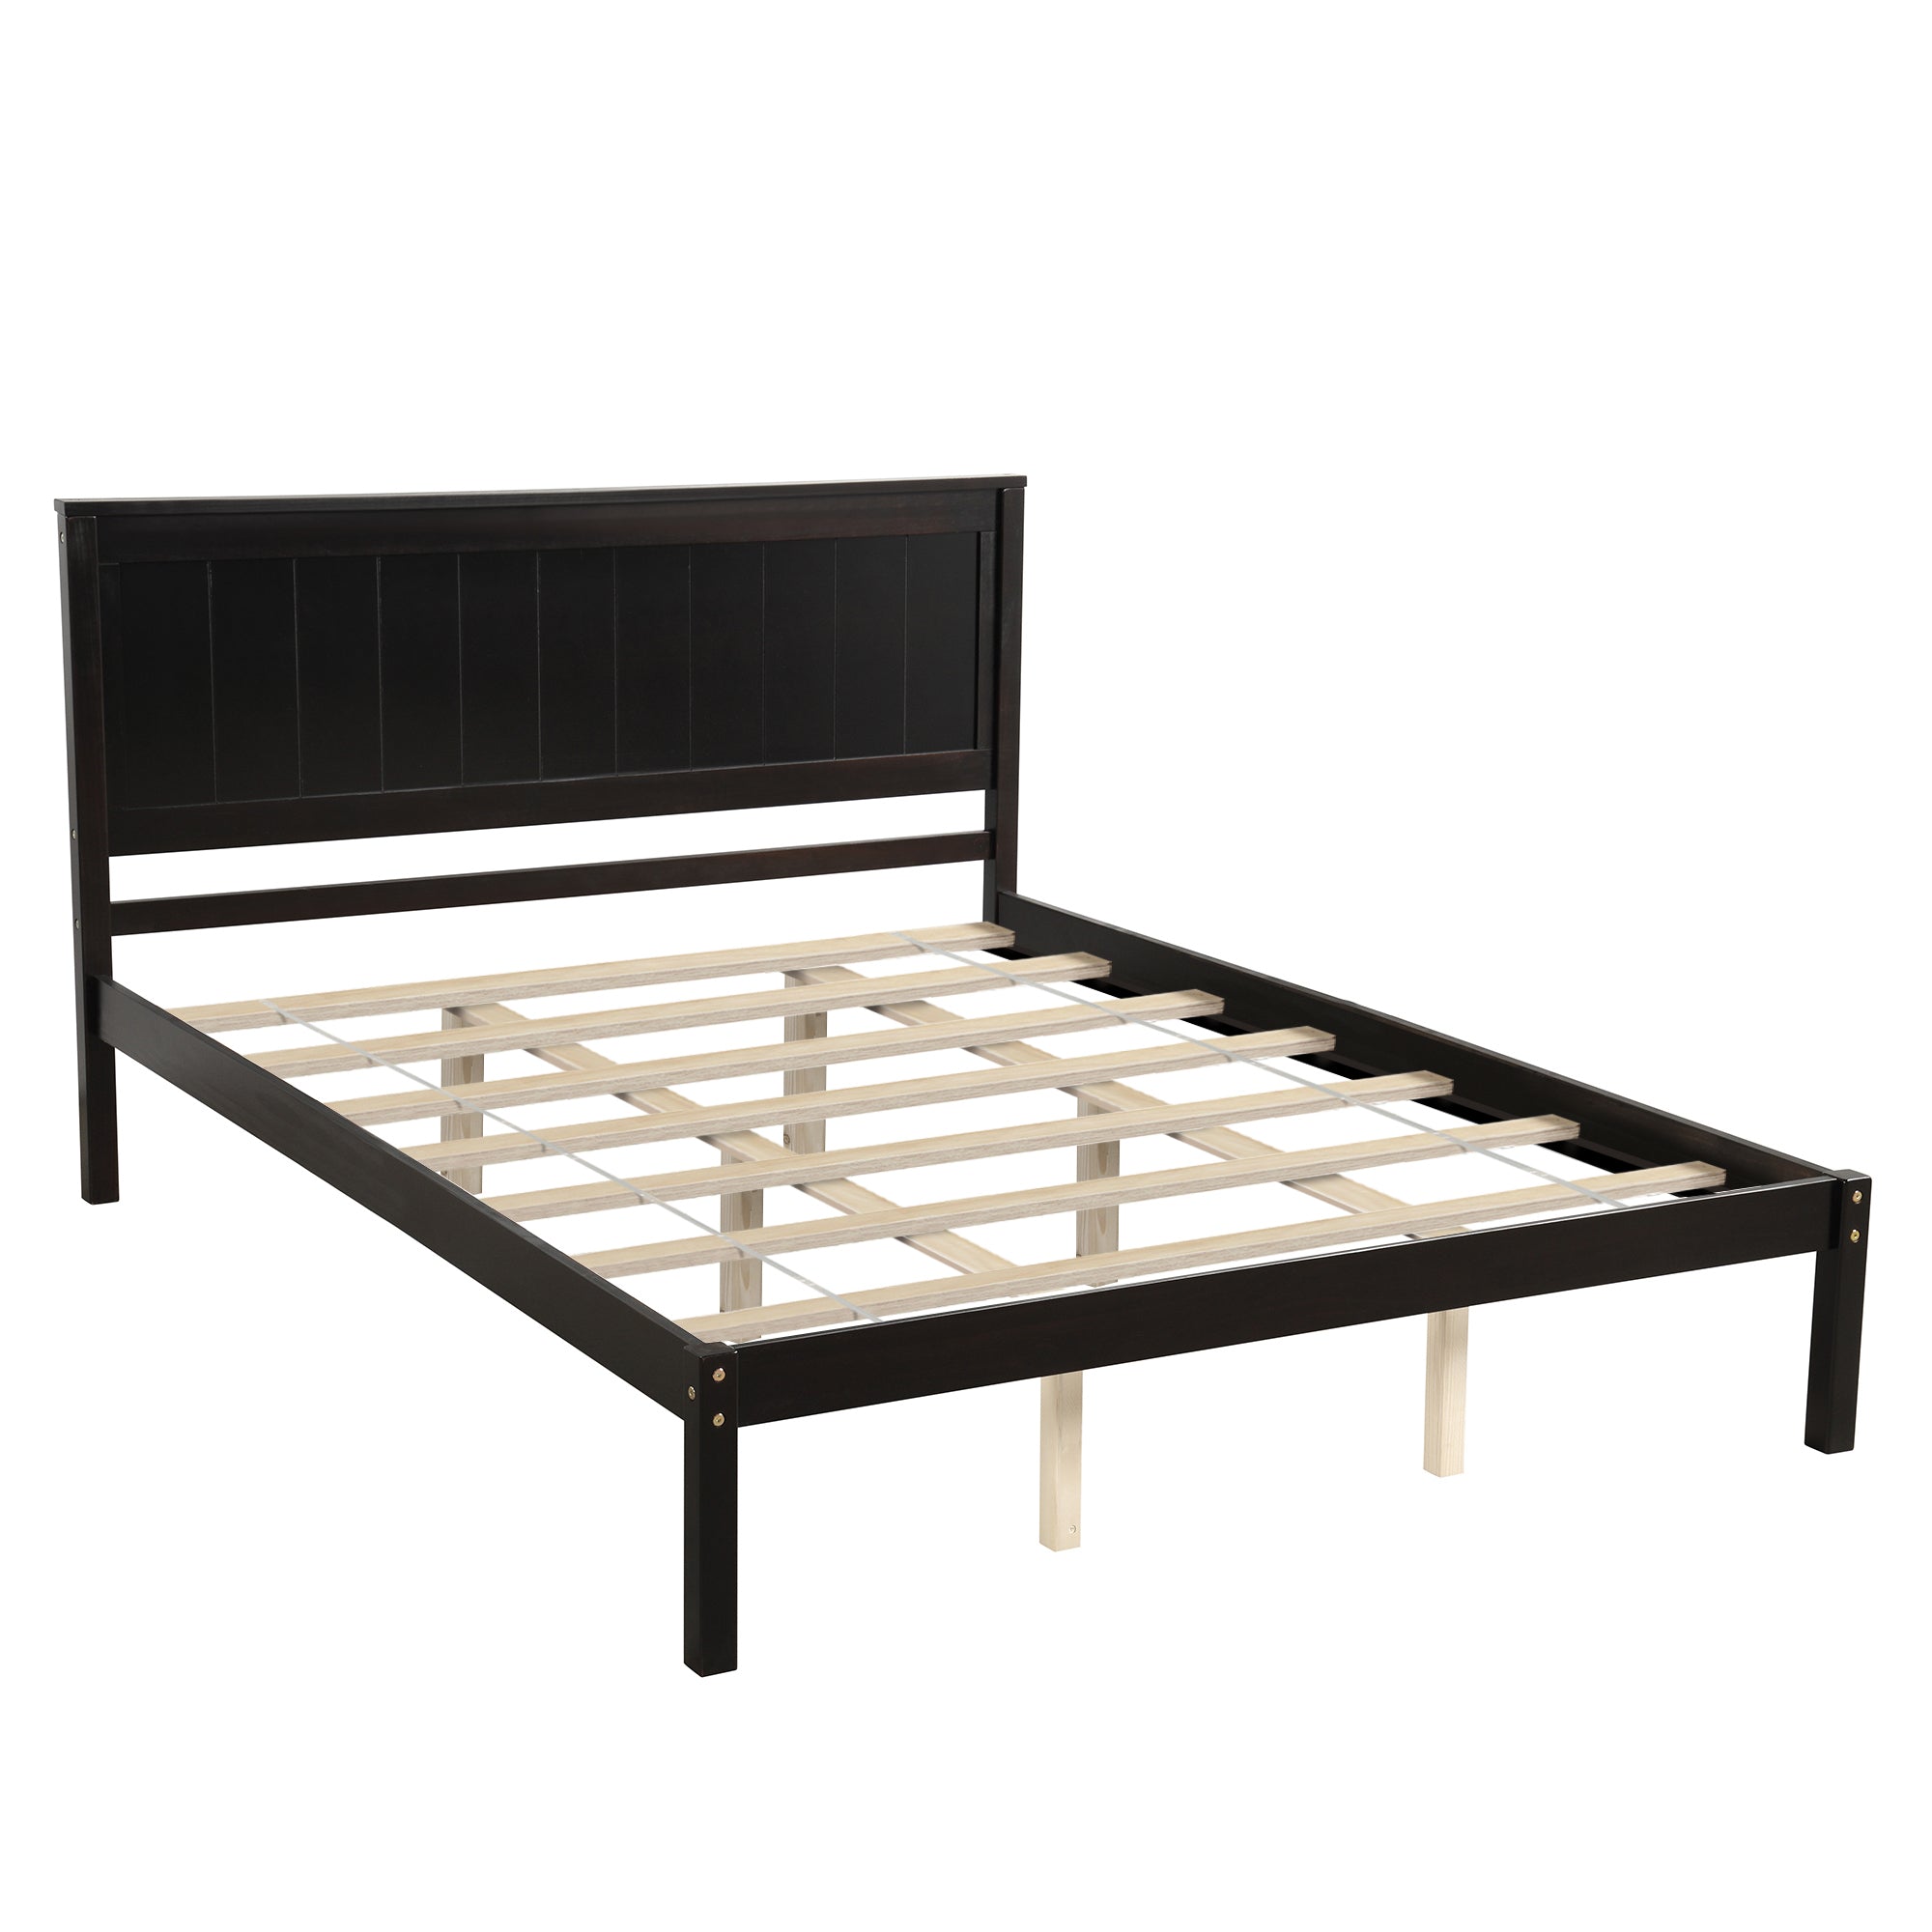 Queen Size Espresso Platform Bed Frame with Headboard By: Alabama Beds